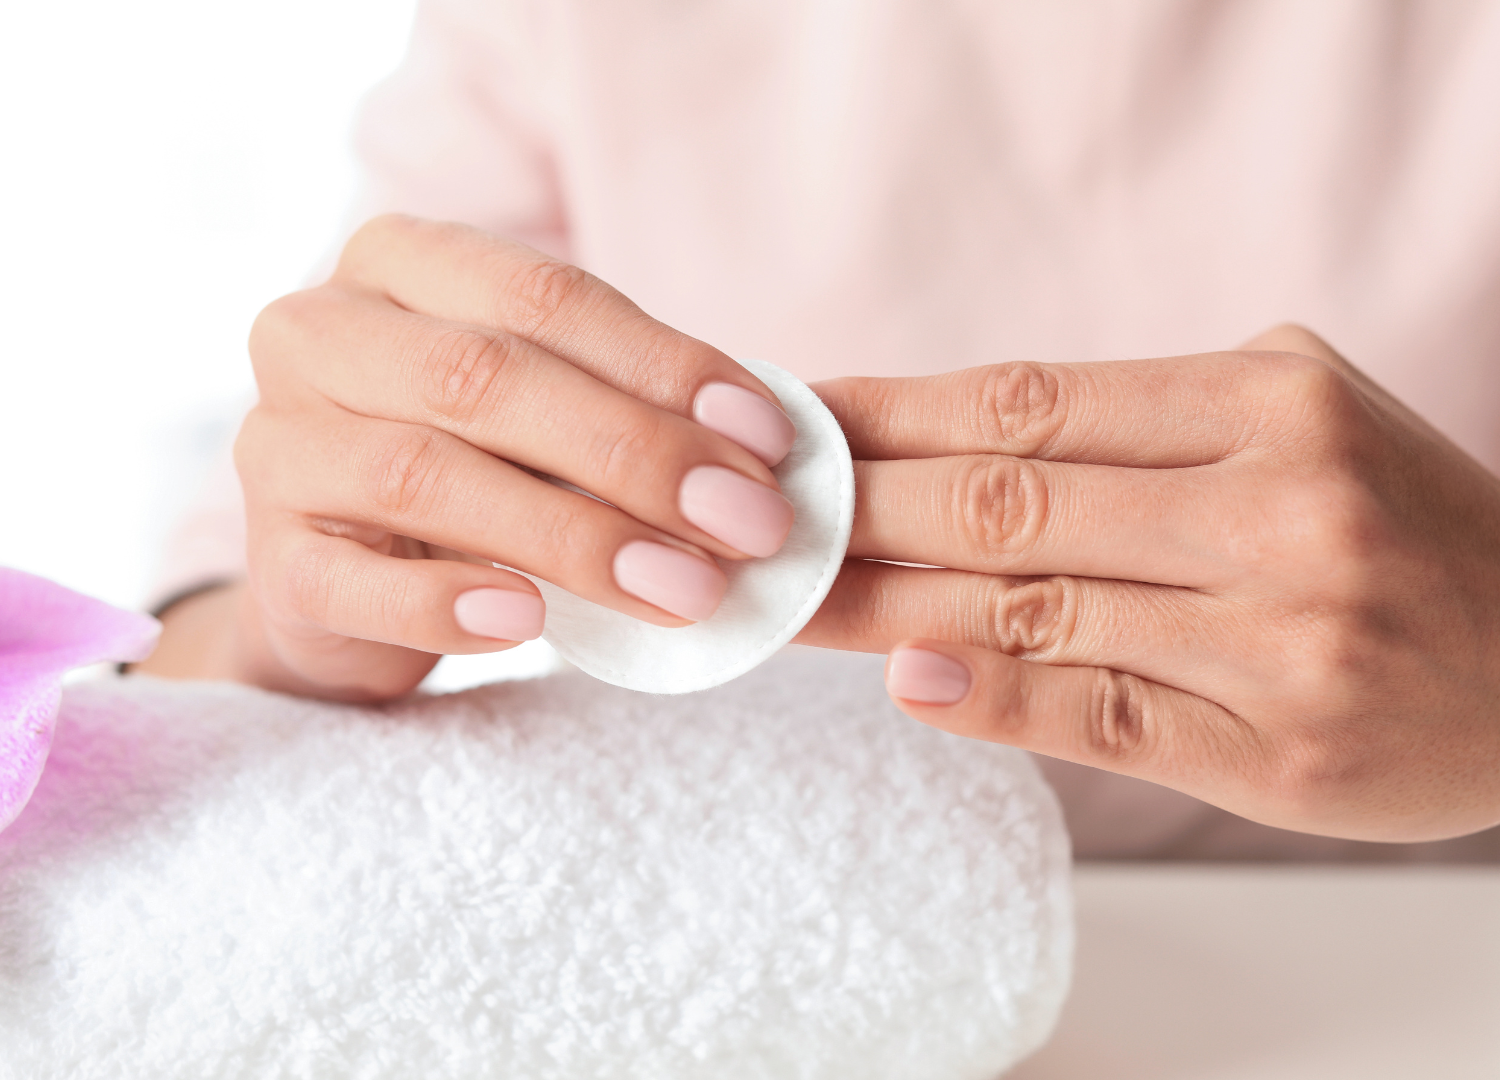 Keep Your Nails Clean and Healthy with Proper